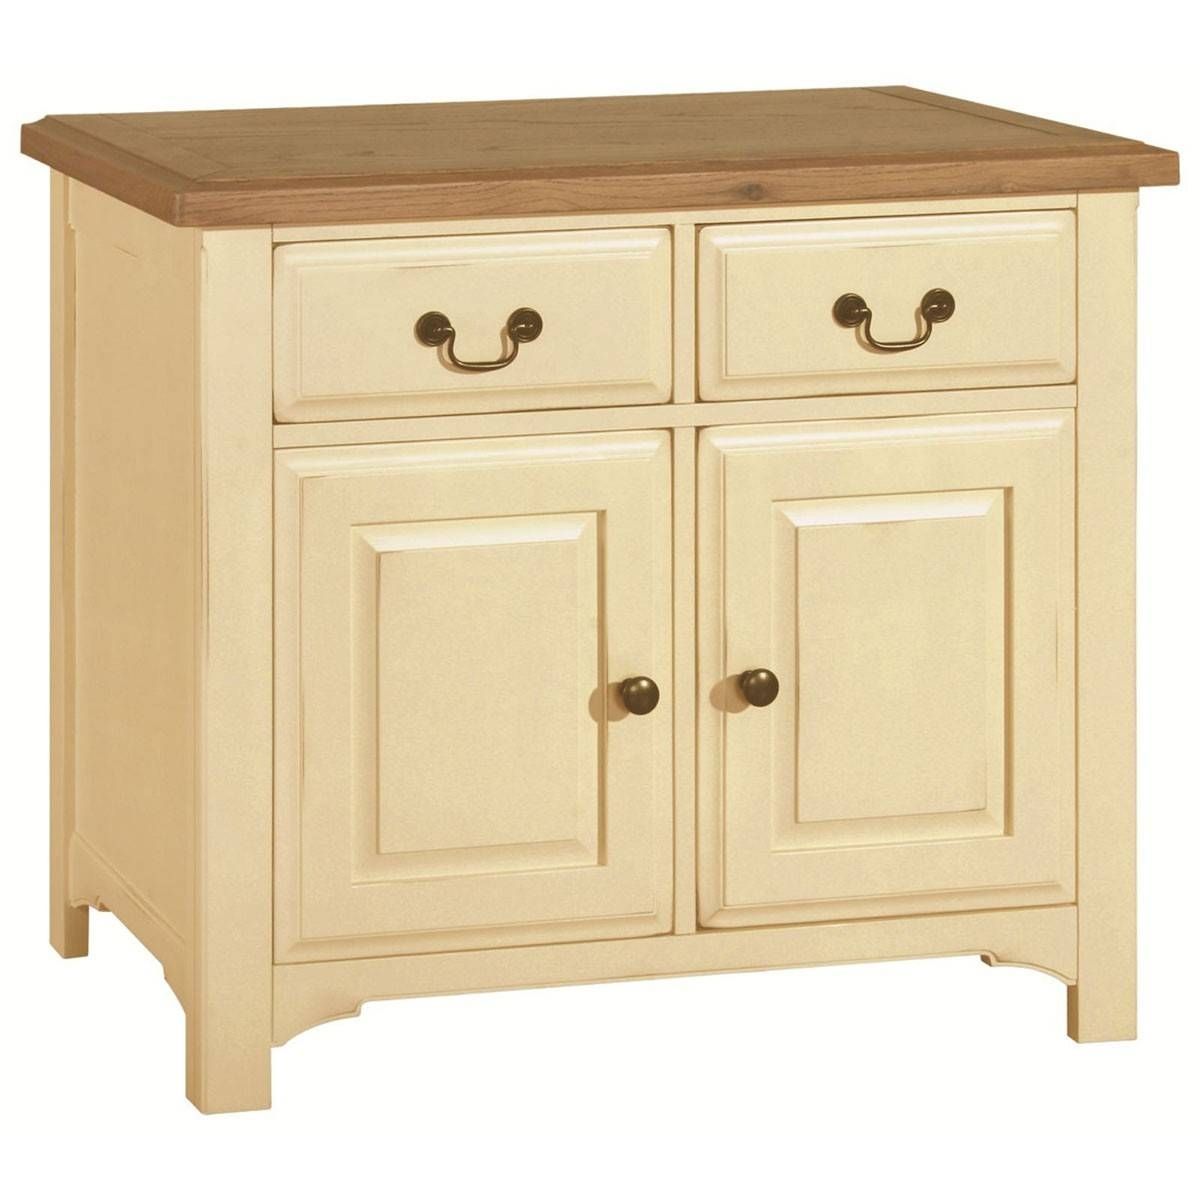 Hutch® – Havannah Cream Painted Oak Small Sideboard In Cream Sideboards (View 4 of 15)